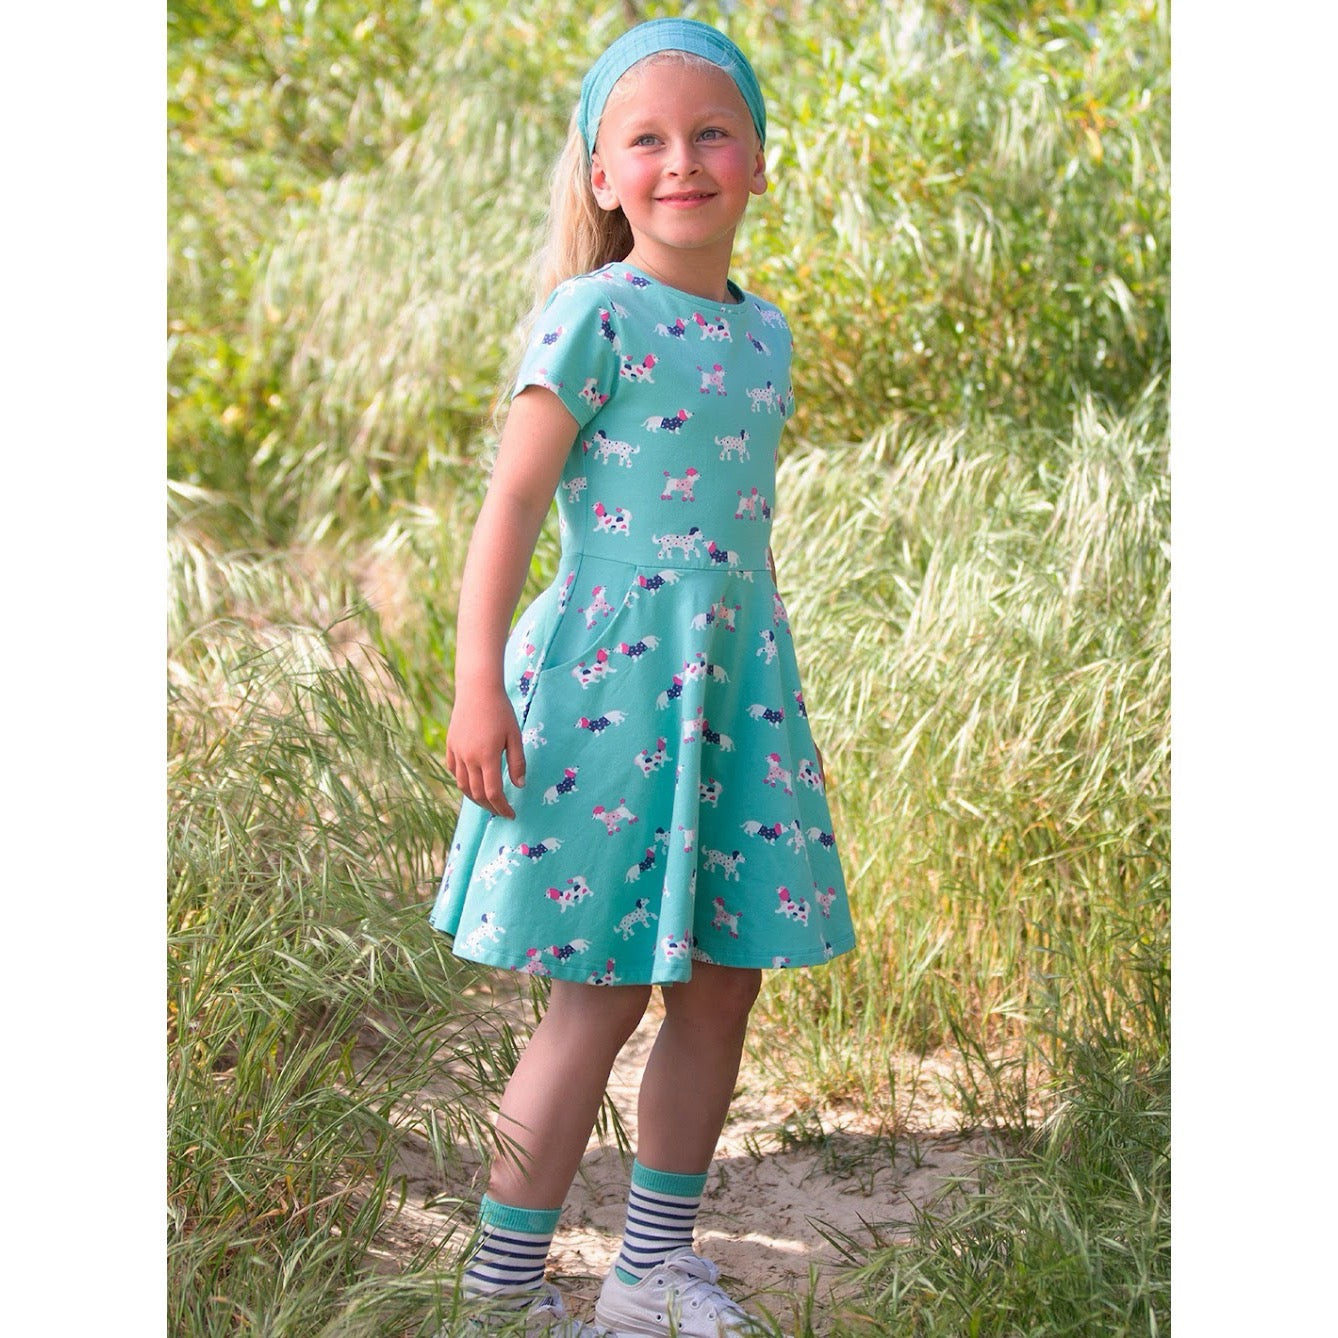 Kite Flora And Friends Skater Dress 41-9743 Clothing 3YRS / Green,4YRS / Green,5YRS / Green,6YRS / Green,7YRS / Green,8YRS / Green,9YRS / Green,10-11YRS / Green